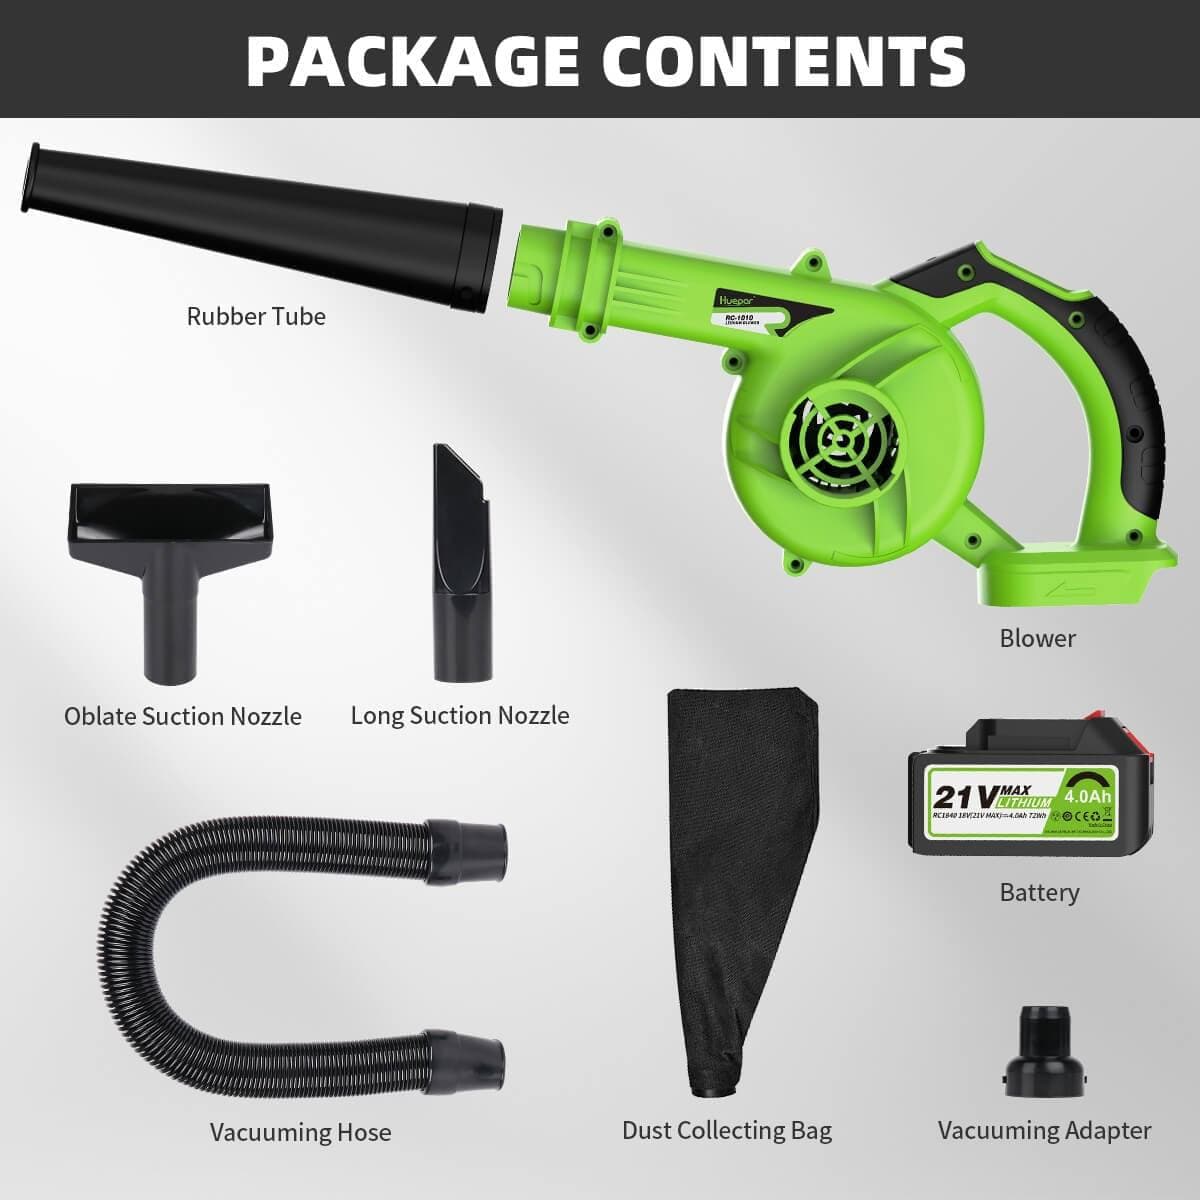 Cordless electric handheld leaf blower for blowing leaves and dust, vacuuming capabilities, with advanced technology by Huepar, free shipping1